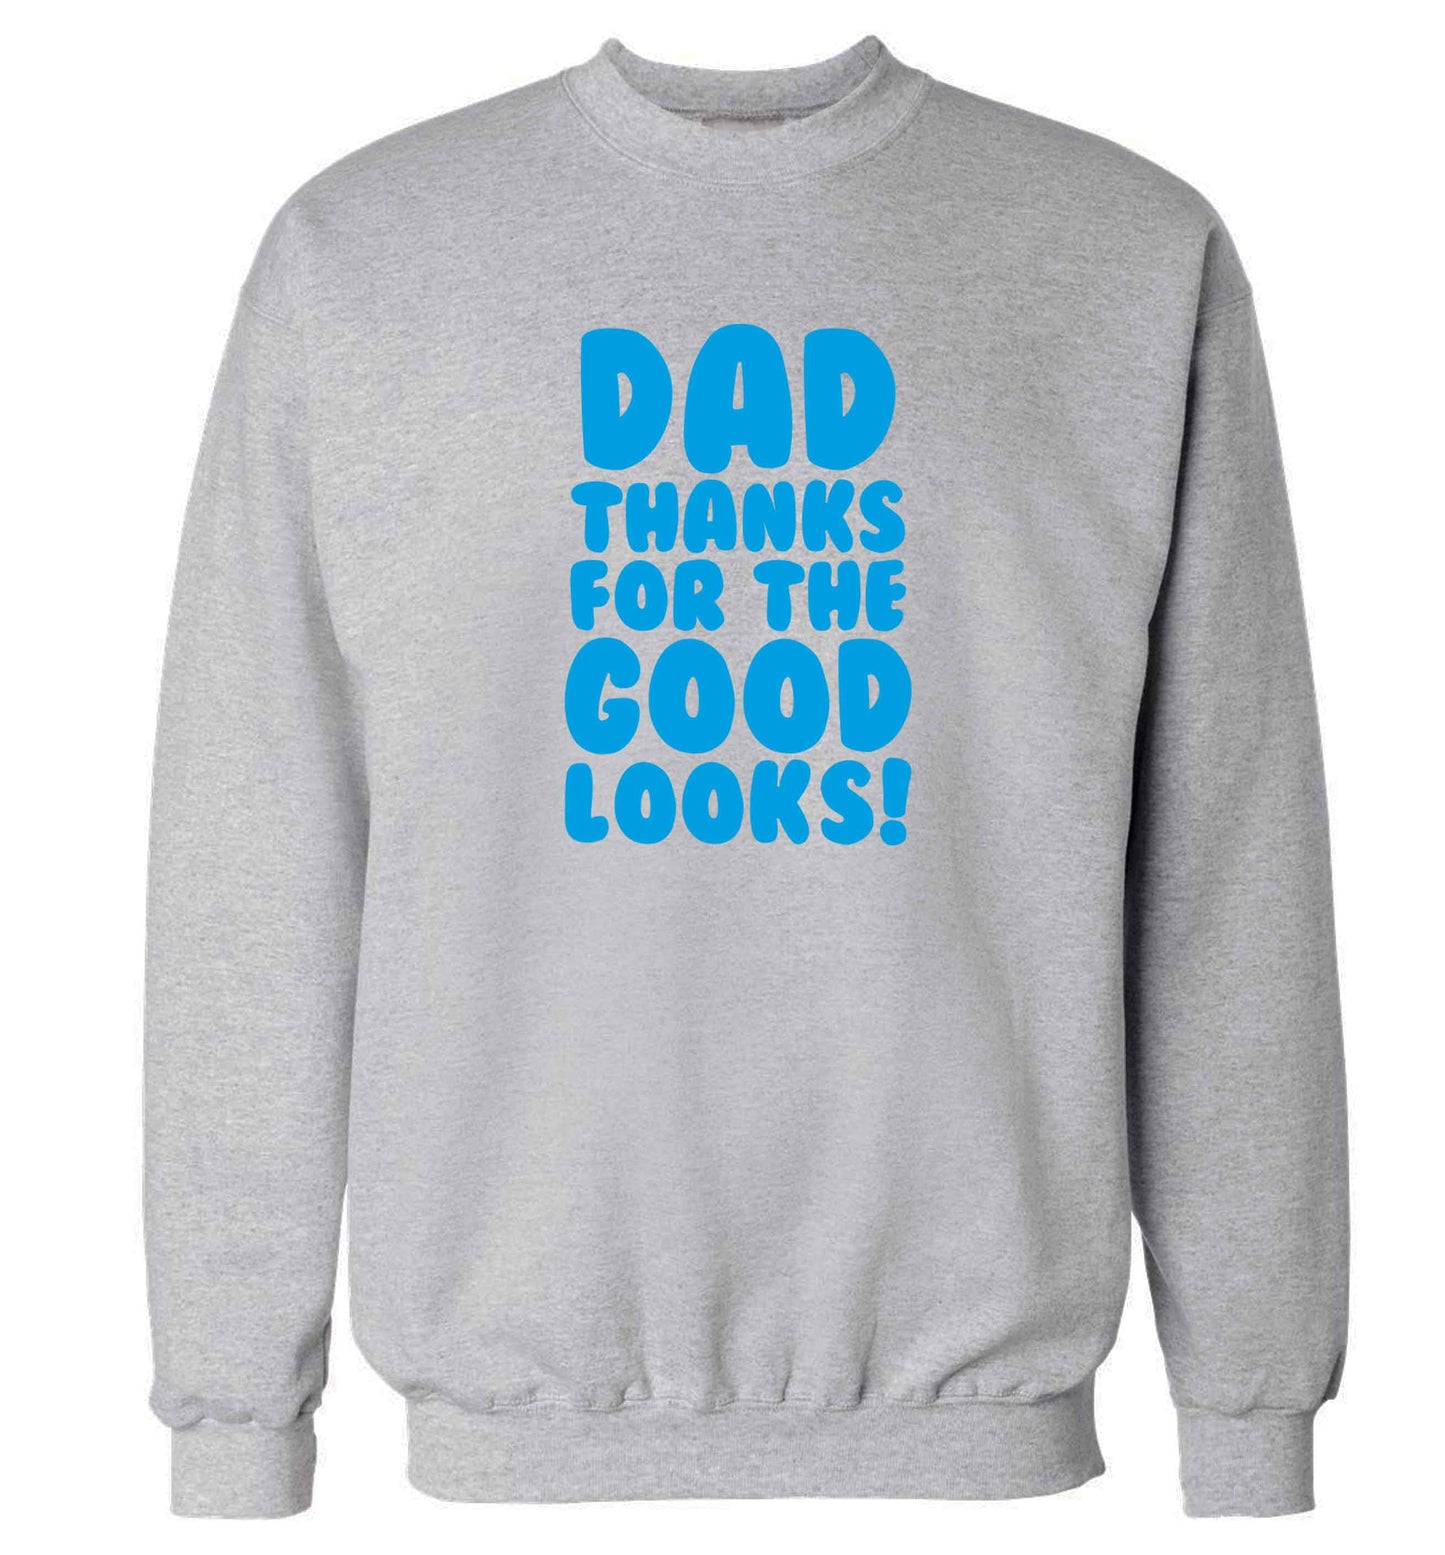 Dad thanks for the good looks adult's unisex grey sweater 2XL